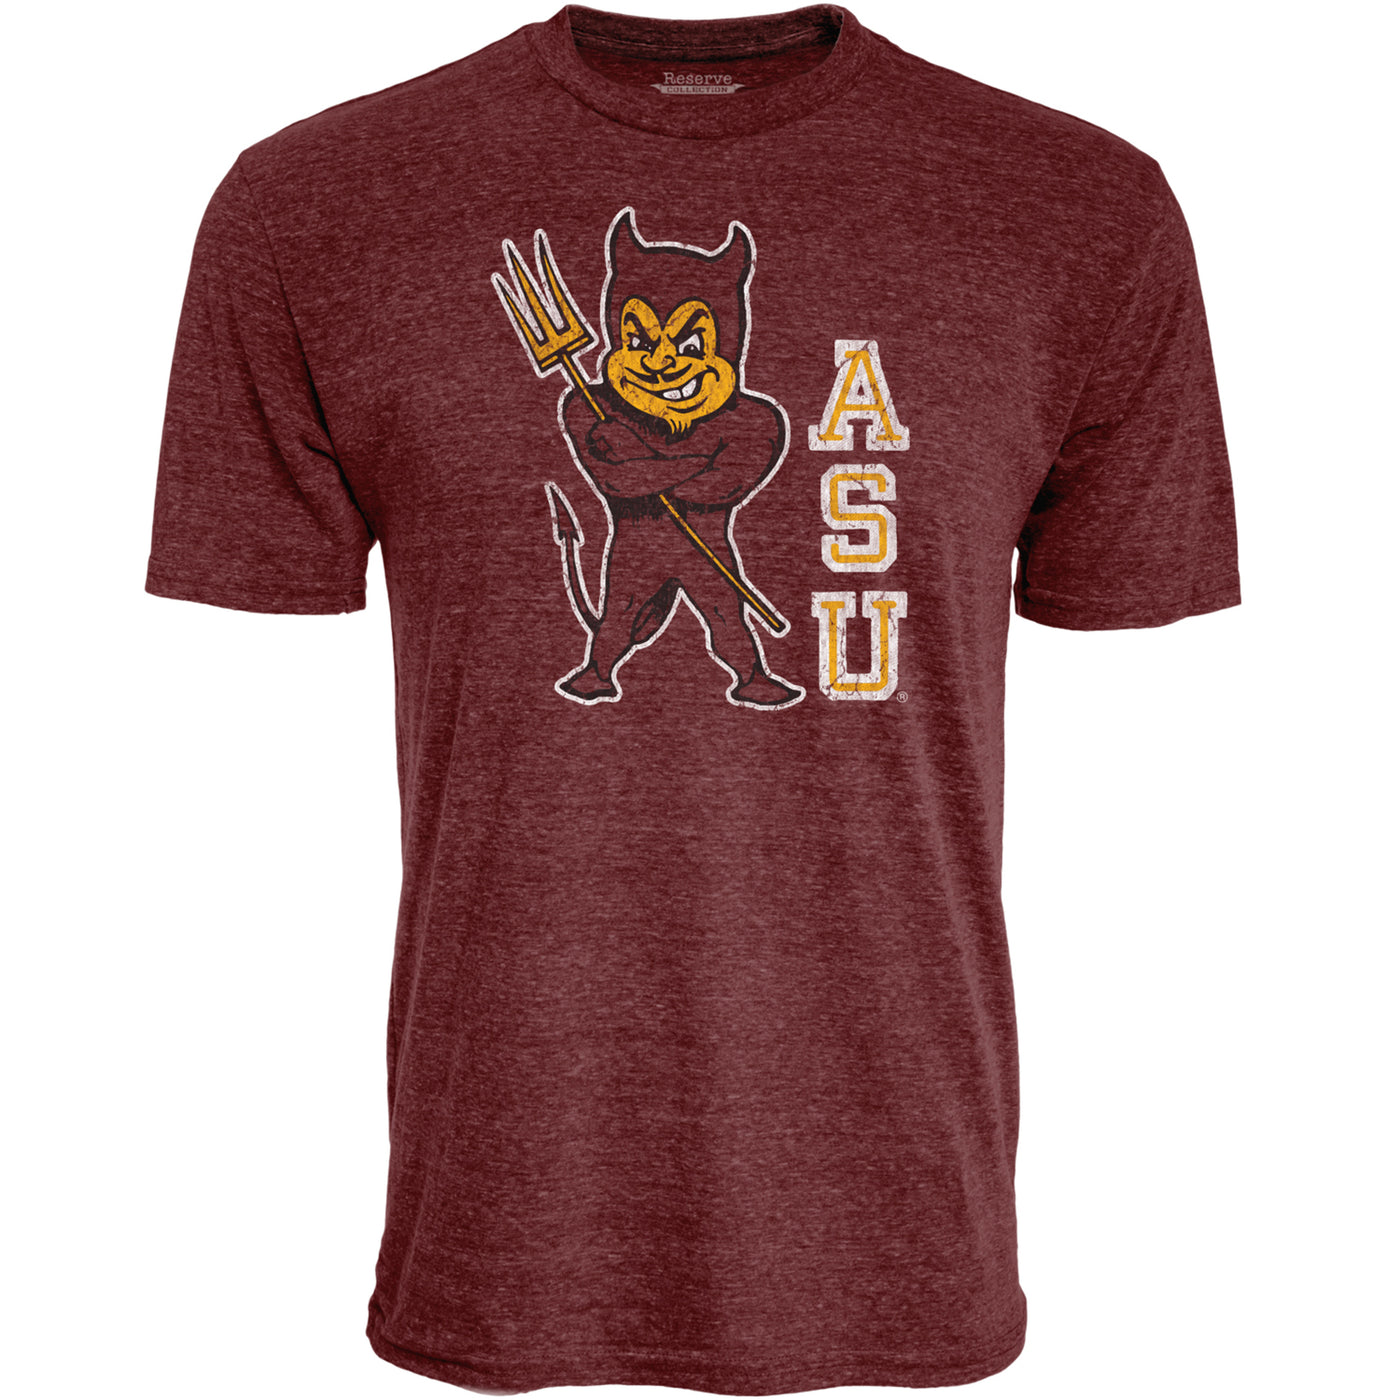 ASU maroon tee with corssed arm Sparky next to stacked letters 'A, S, U'